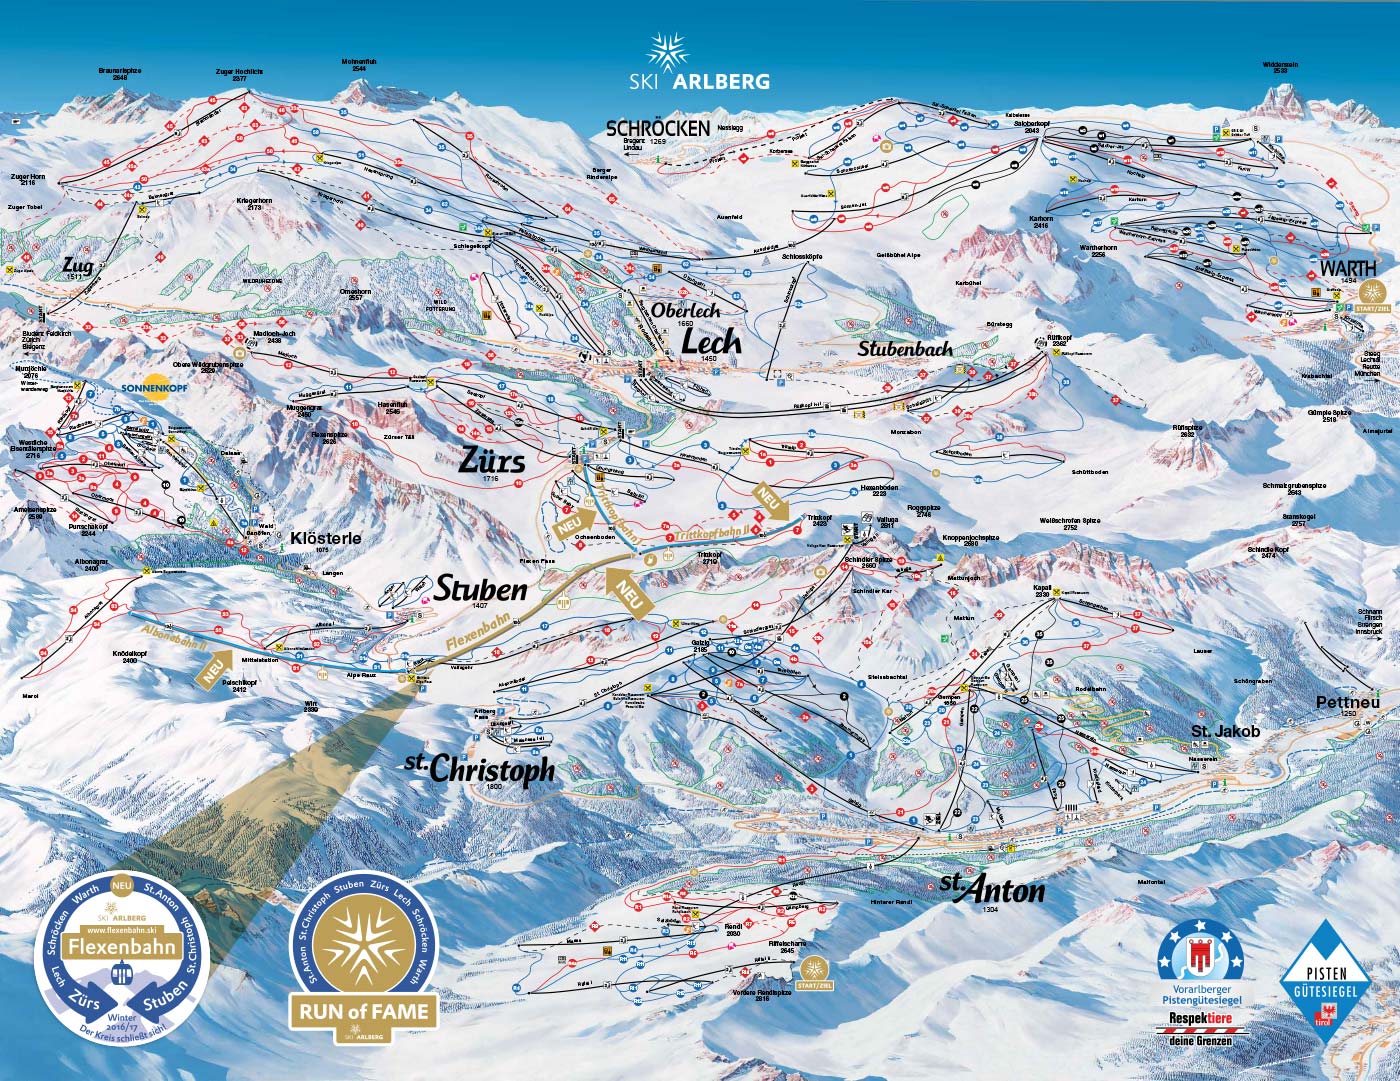 New Lifts To Connect St Anton and Lech Sides of Arlberg Next Winter